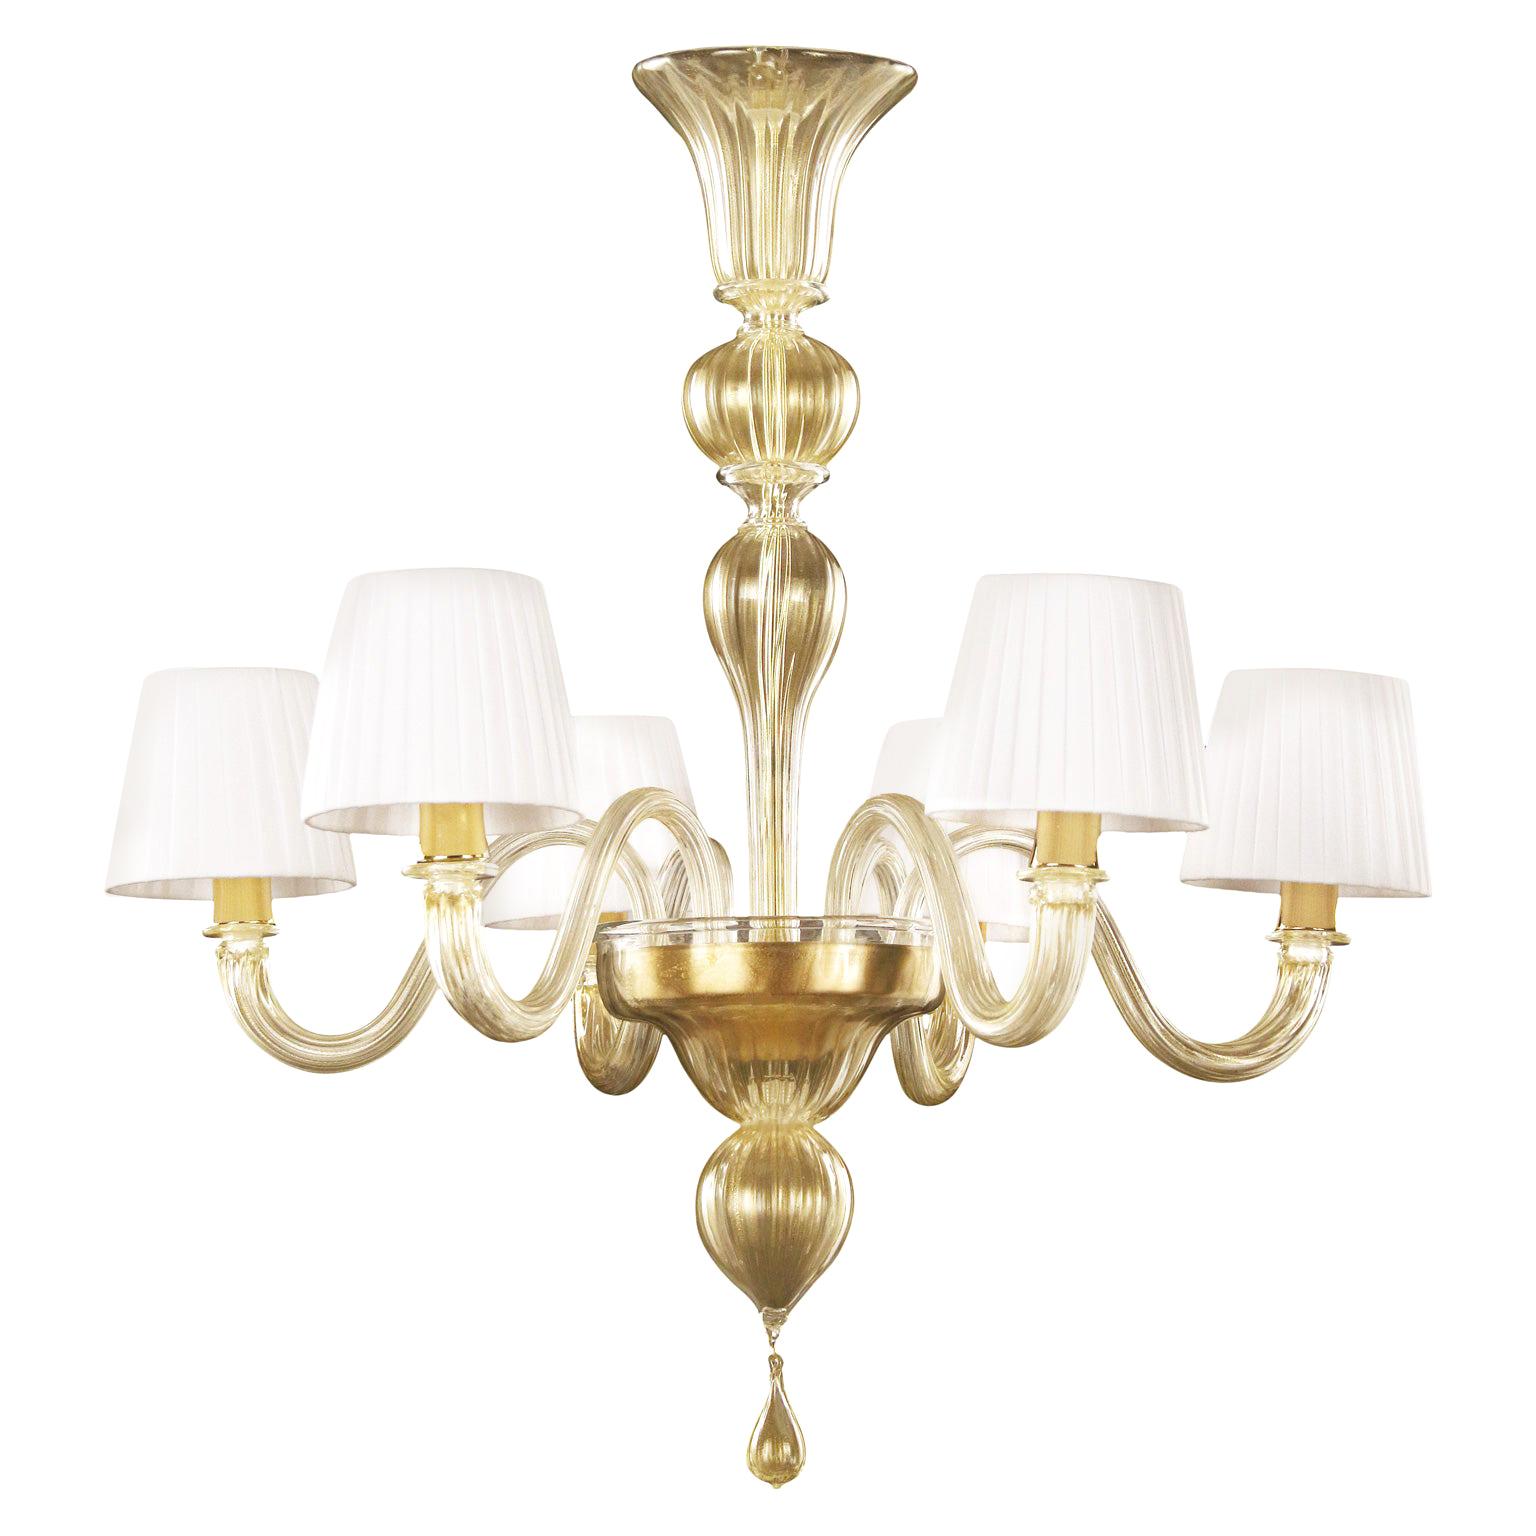 Chandelier 6 Arms Gold Murano Glass, White Lampshades Chapeau by Multiforme